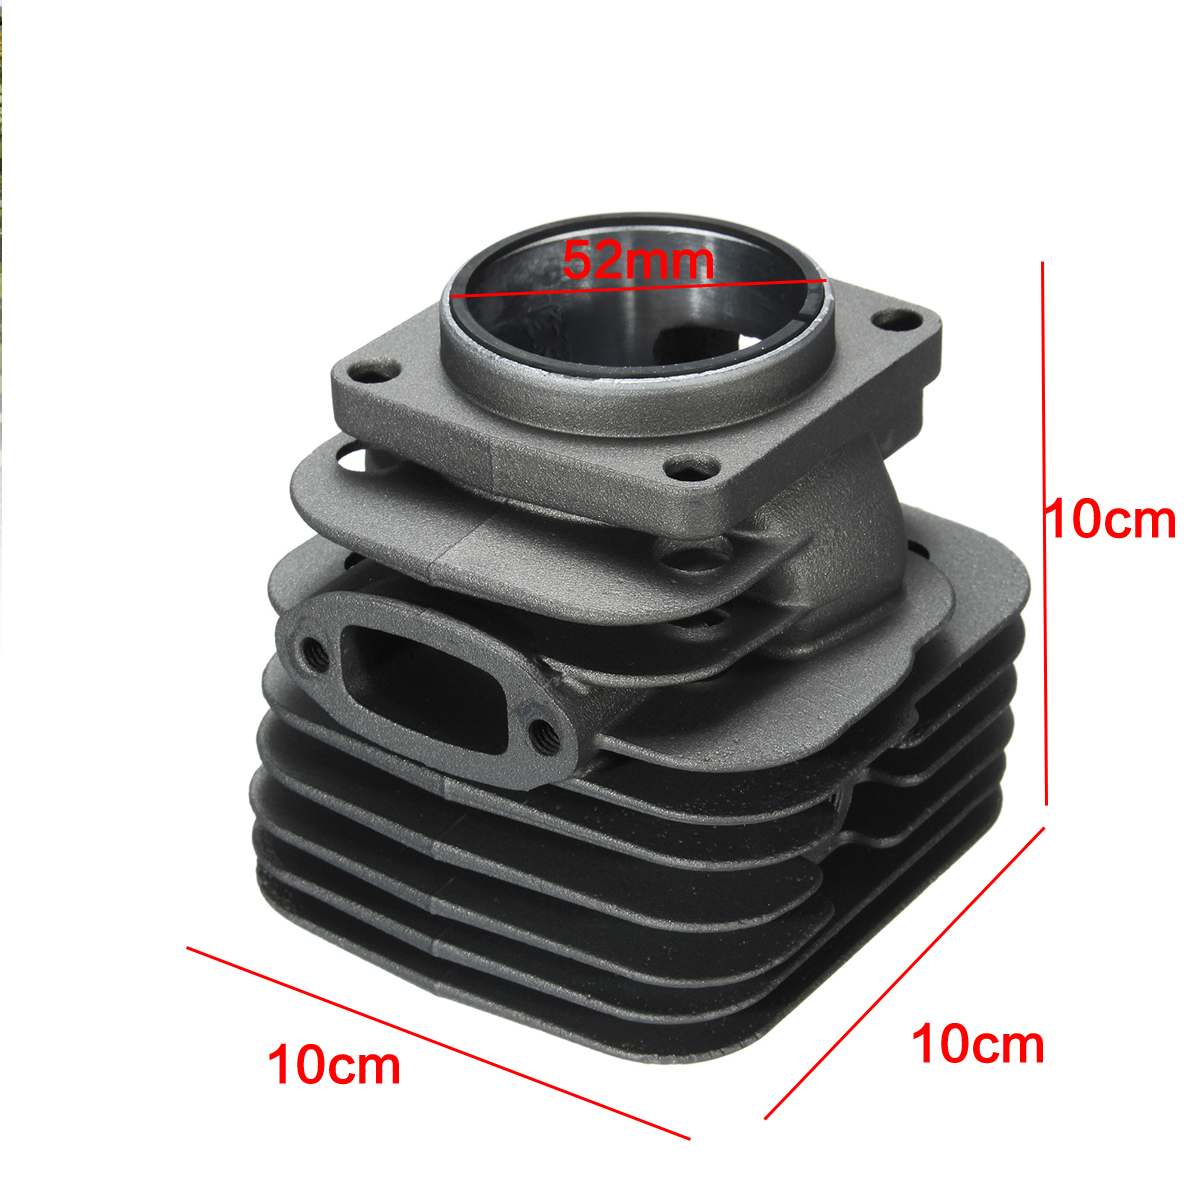 52mm Air Cylinder Head Piston Sleeve Kit For HUSQVARNA 268XP 272 272XP 272K Chainsaw Chain saws Parts Dropshipping